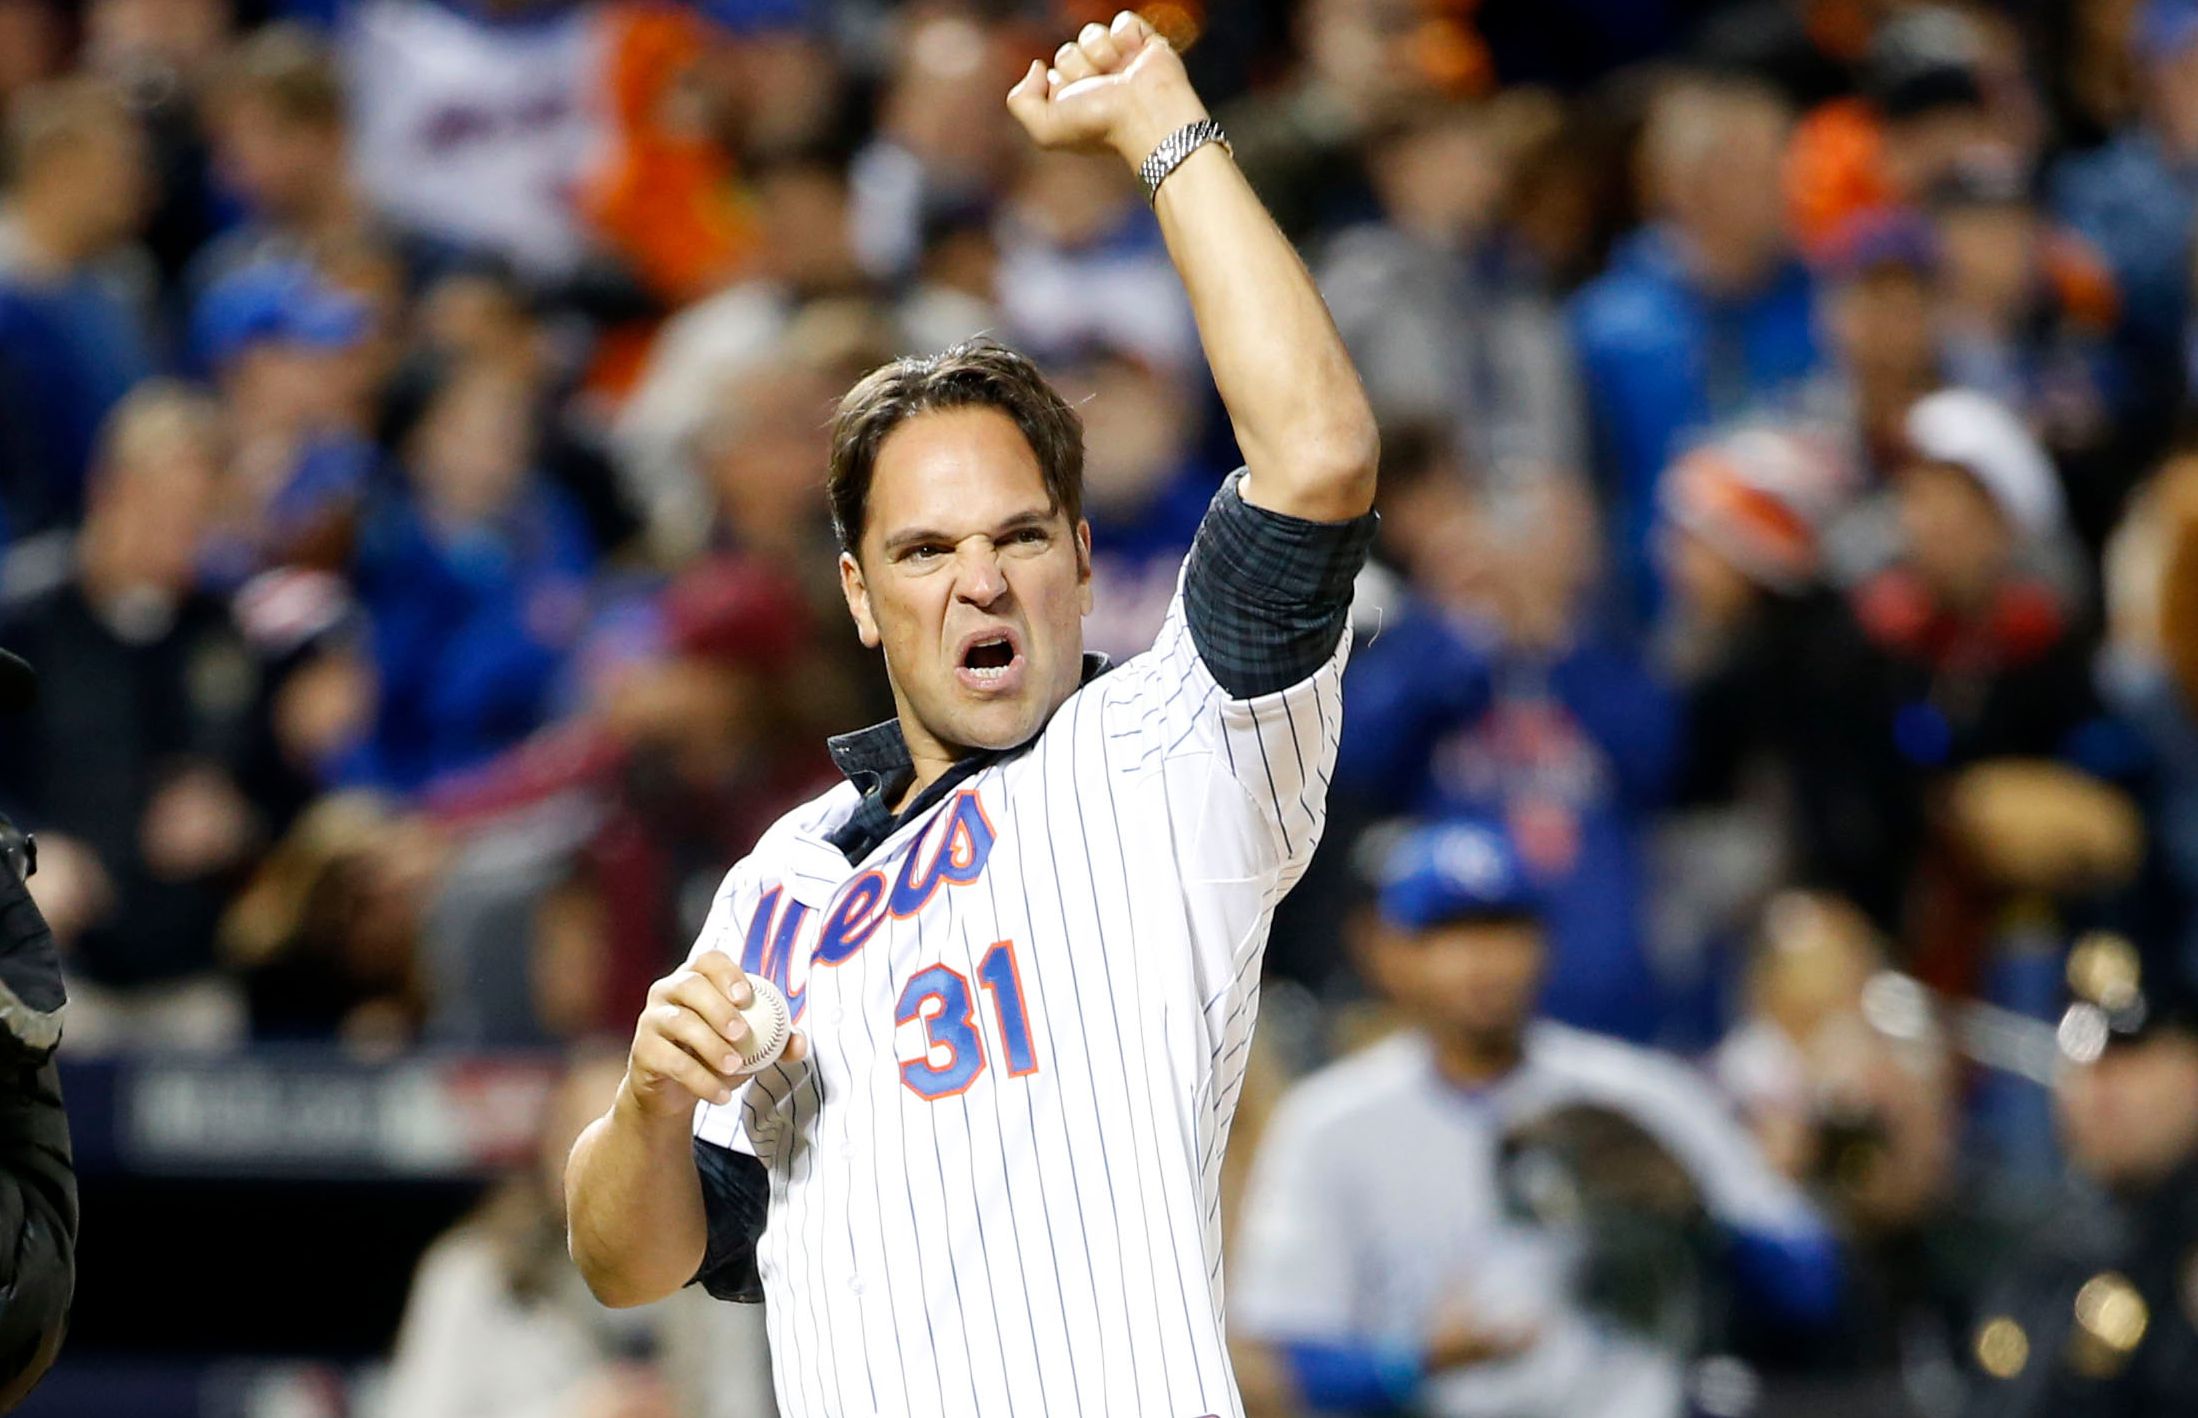 Mets will retire Mike Piazza's No. 31 jersey